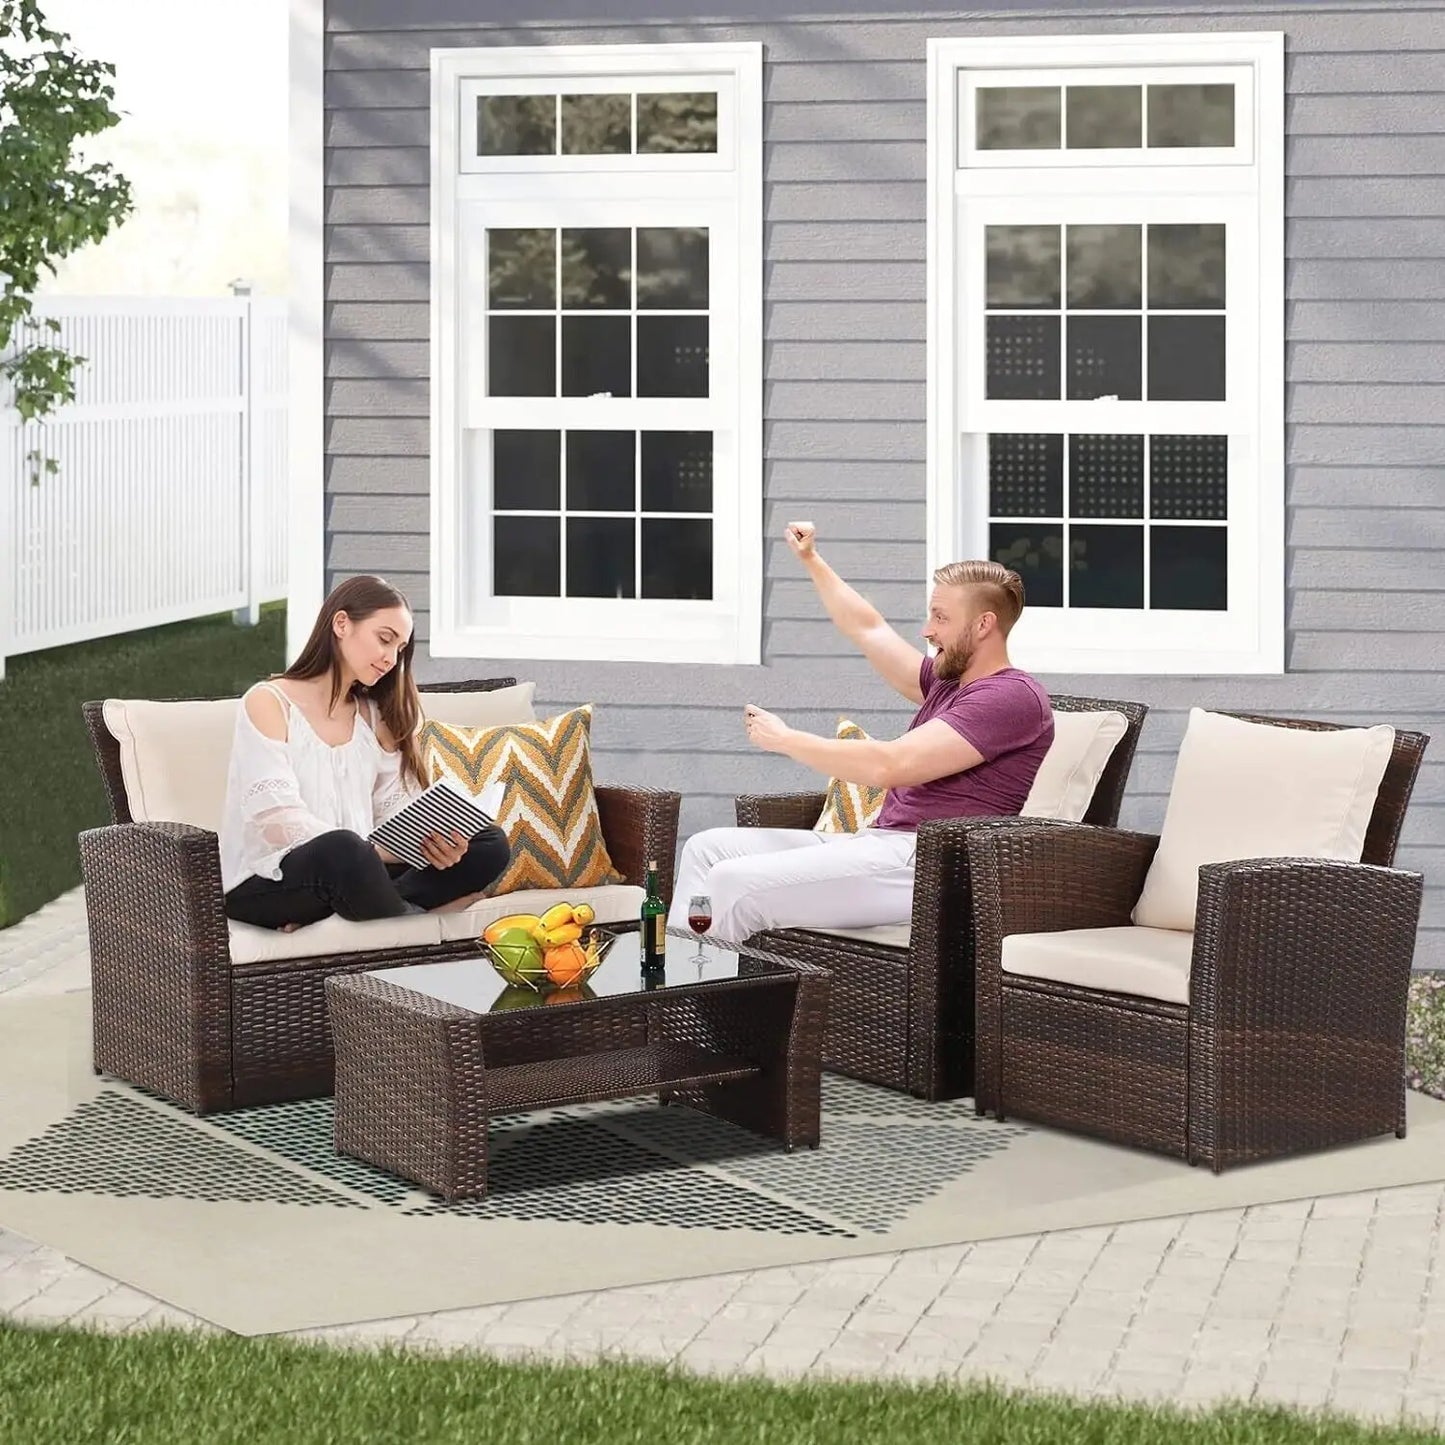 Patio Furniture Sets All-Weather Conversation Set Outdoor Wicker Sectional Sofa Chair w/ Cushion & Coffee Table,Multiple Colors